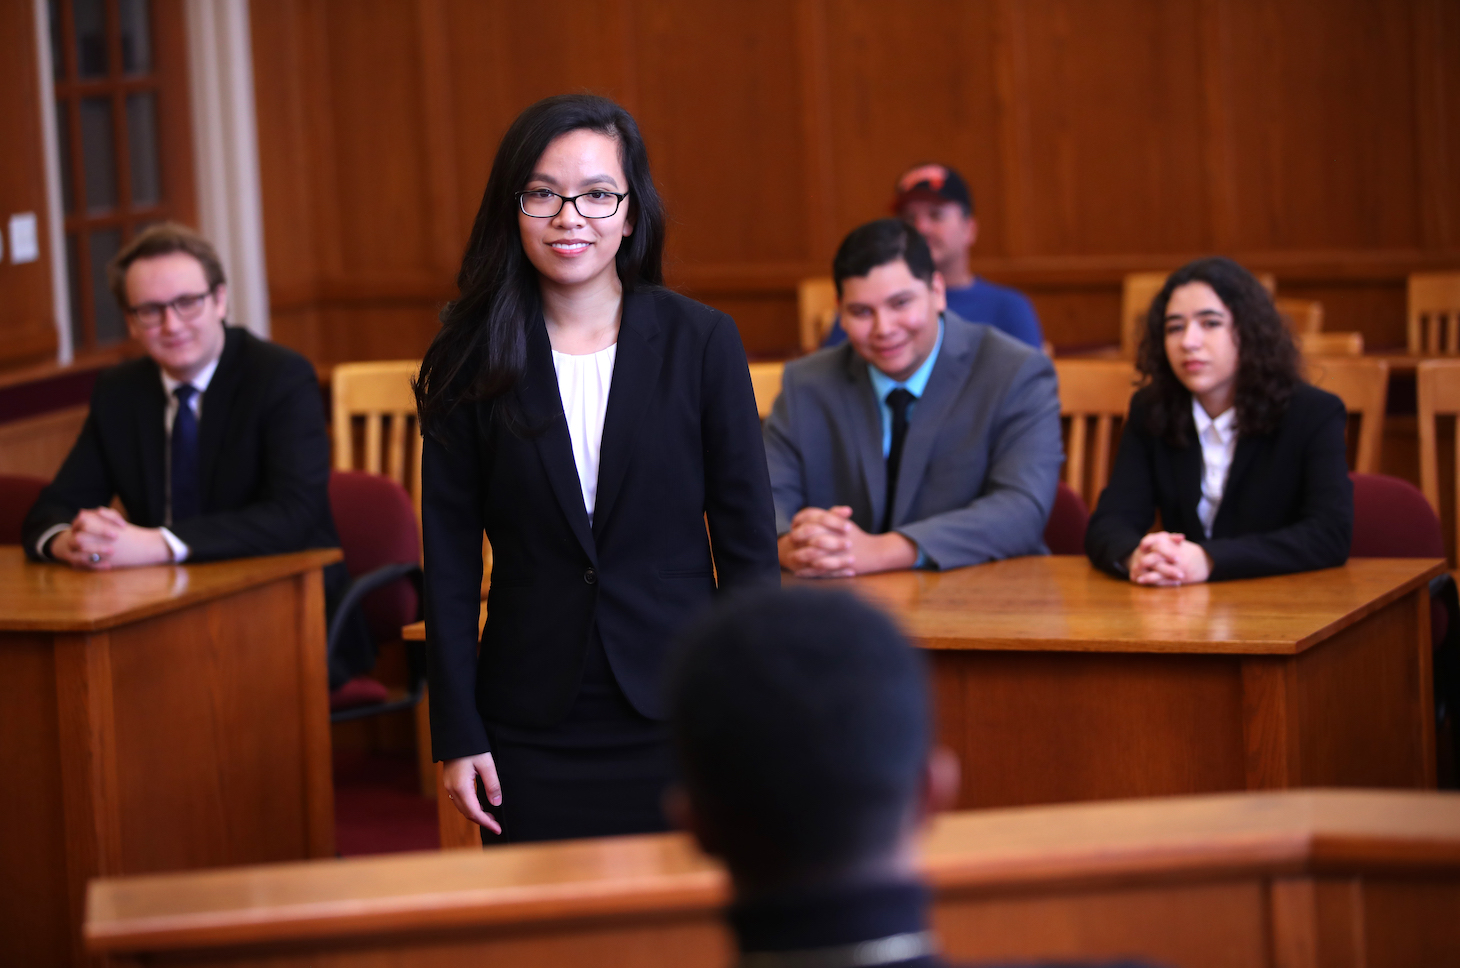 Criminology students participating in Mock Trial